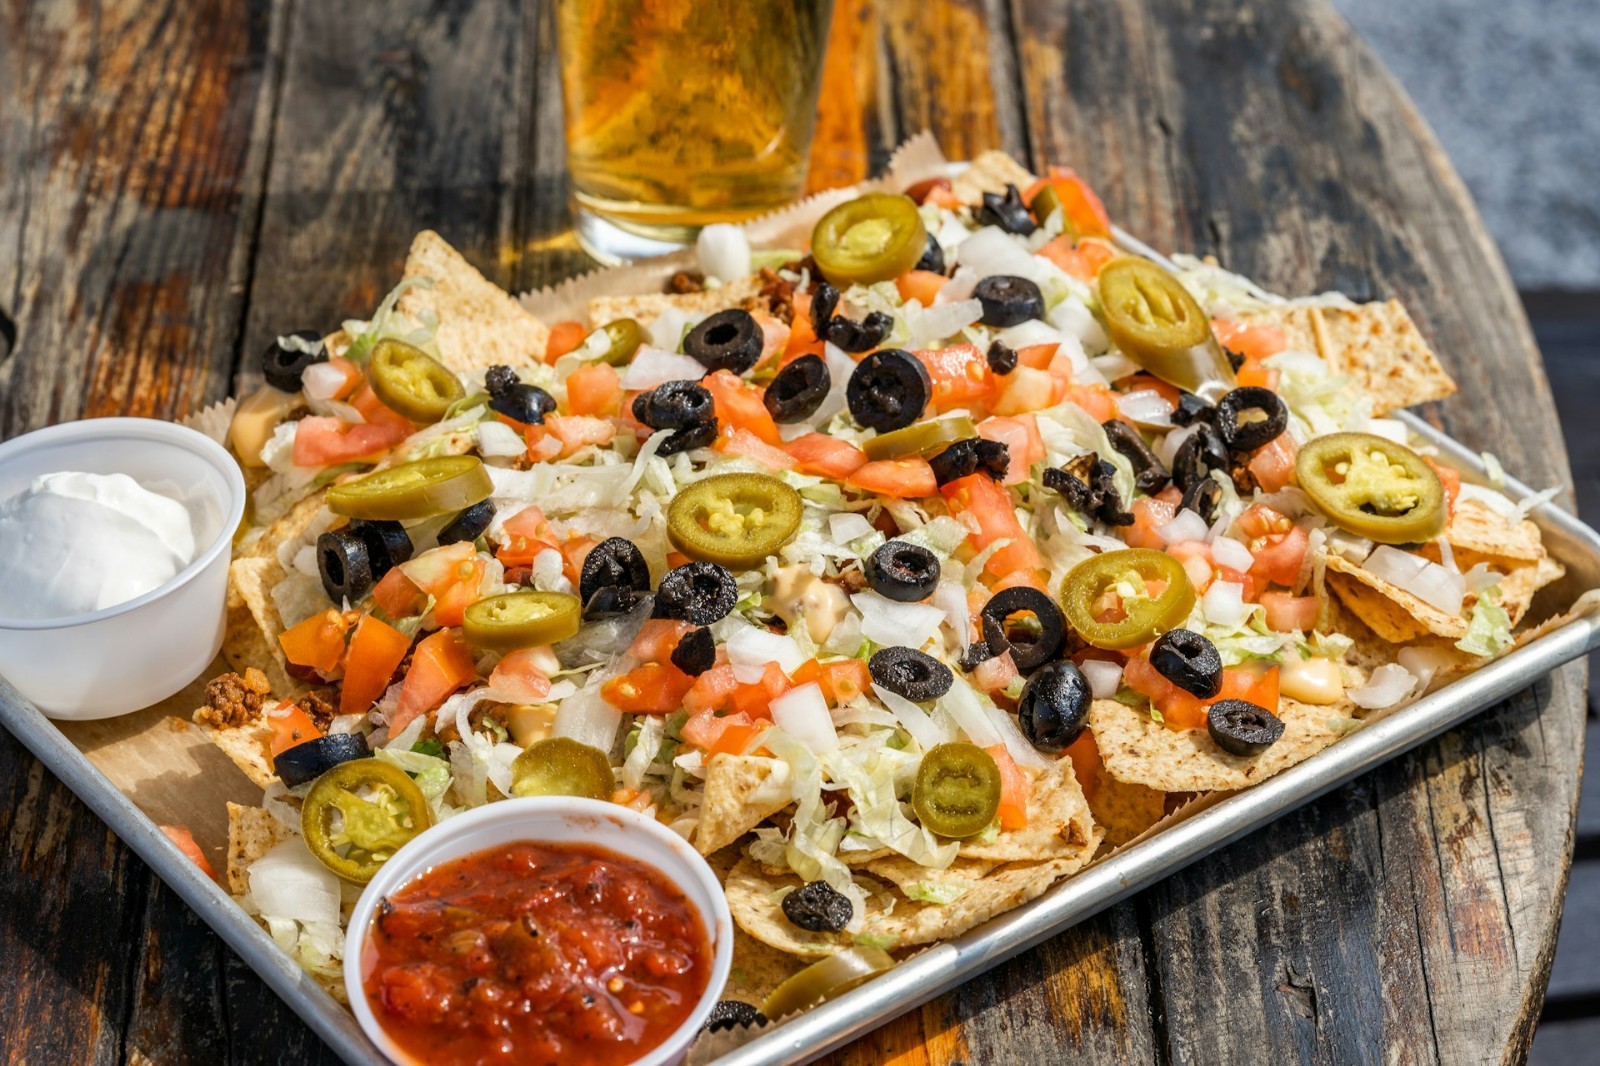 A Nacho Bar Party Is The Party Trend You Need To Try!